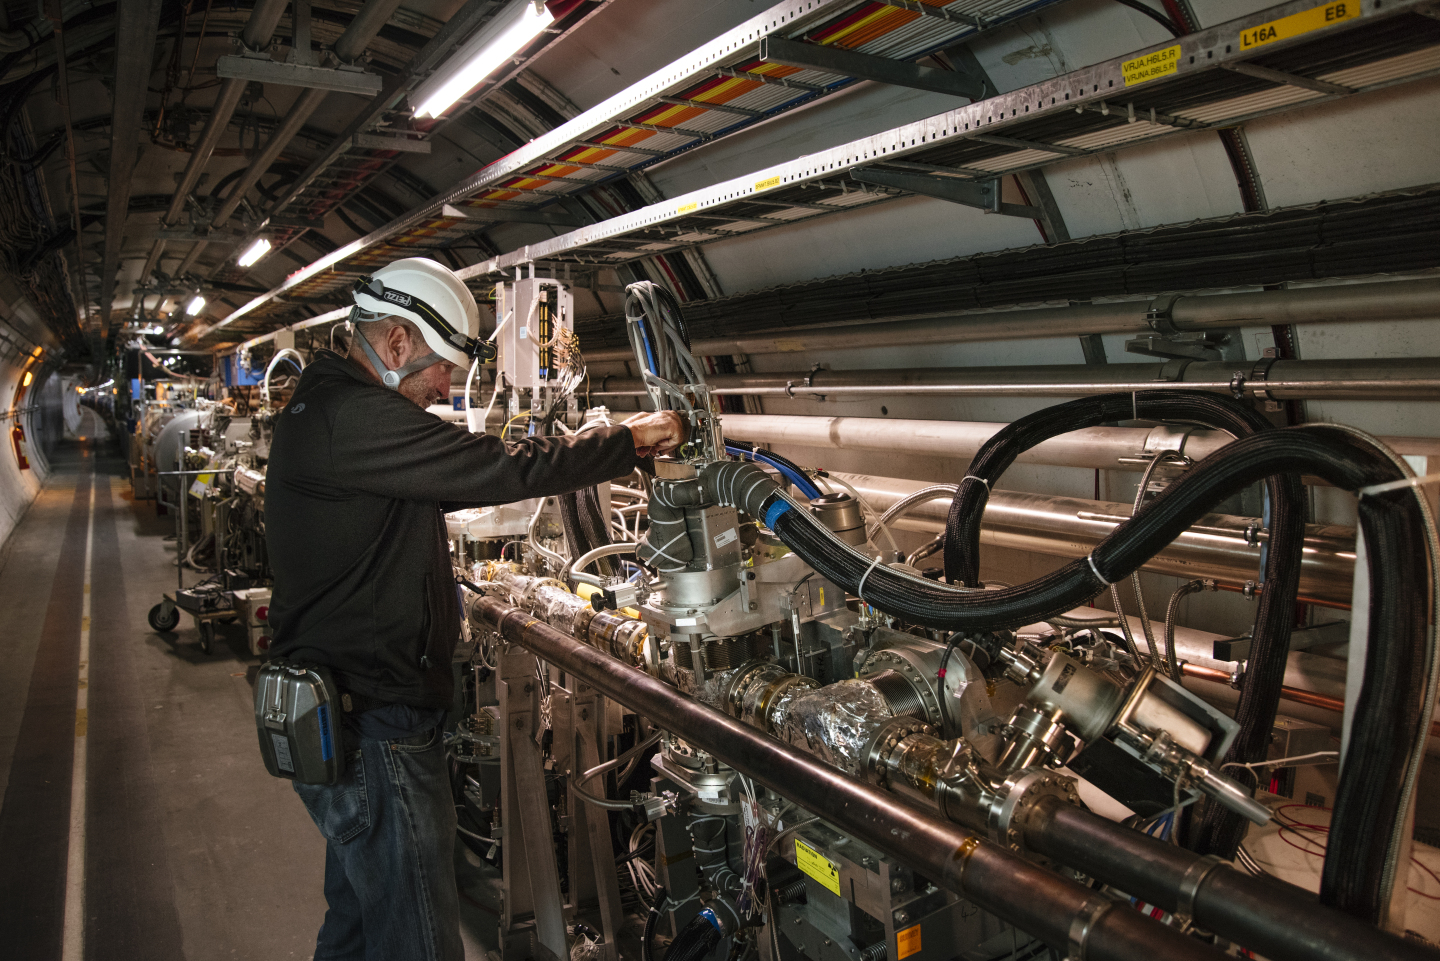 Odd gluon compounds may be lurking in protons